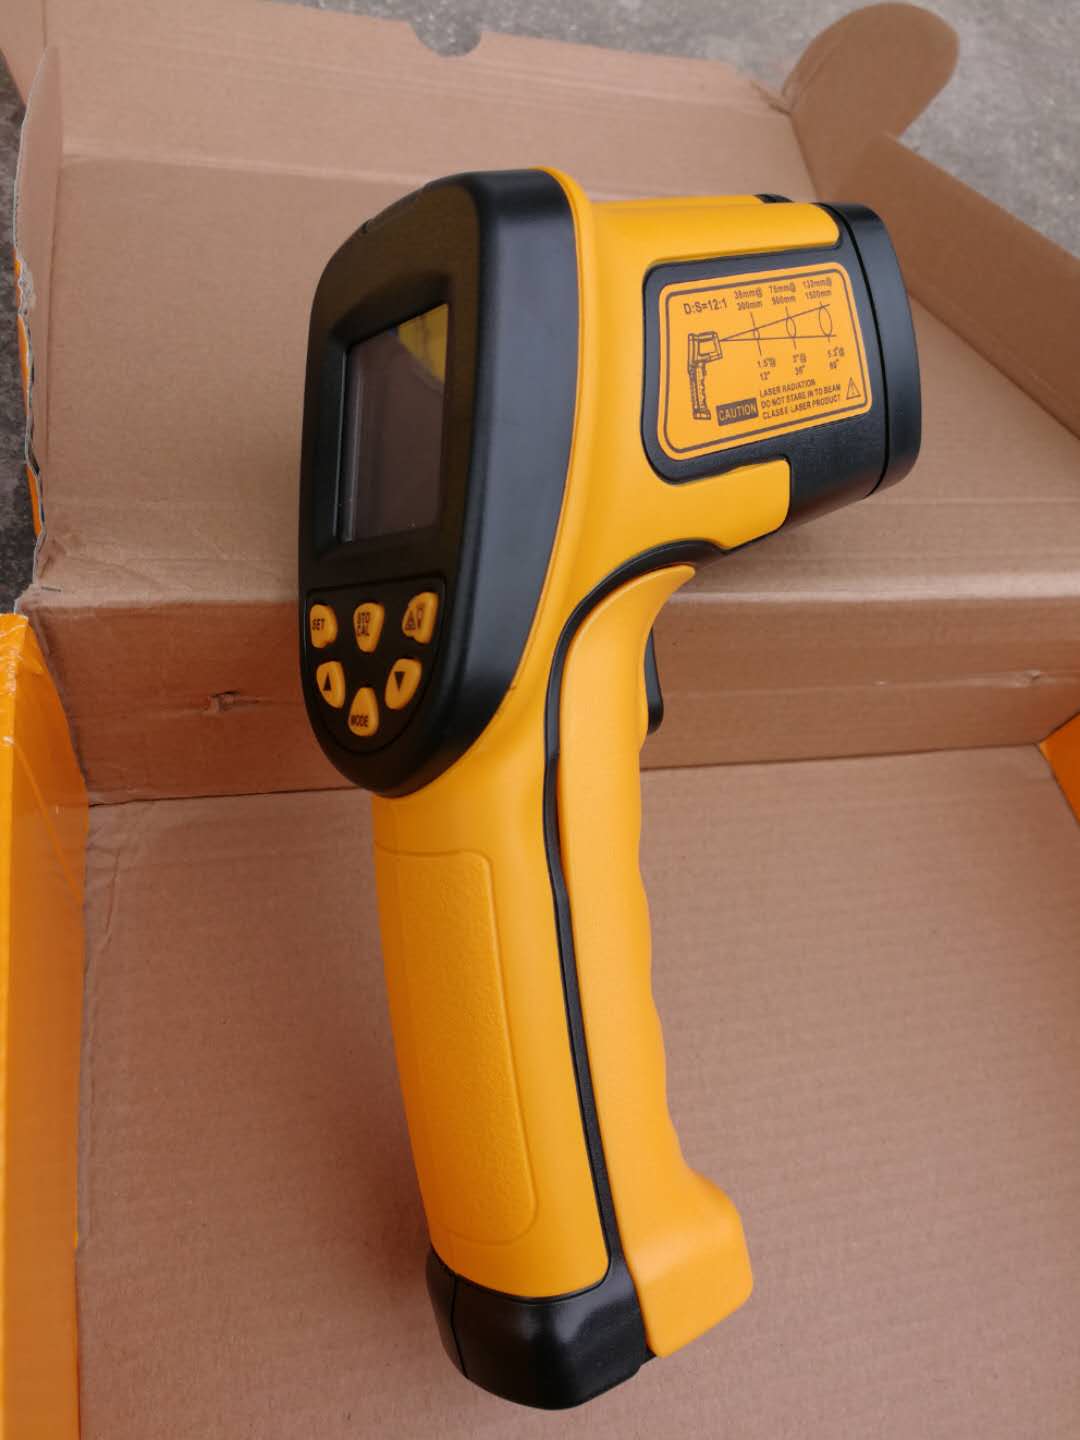 -50’C to 750’C High precision Industry Infrared Thermometer